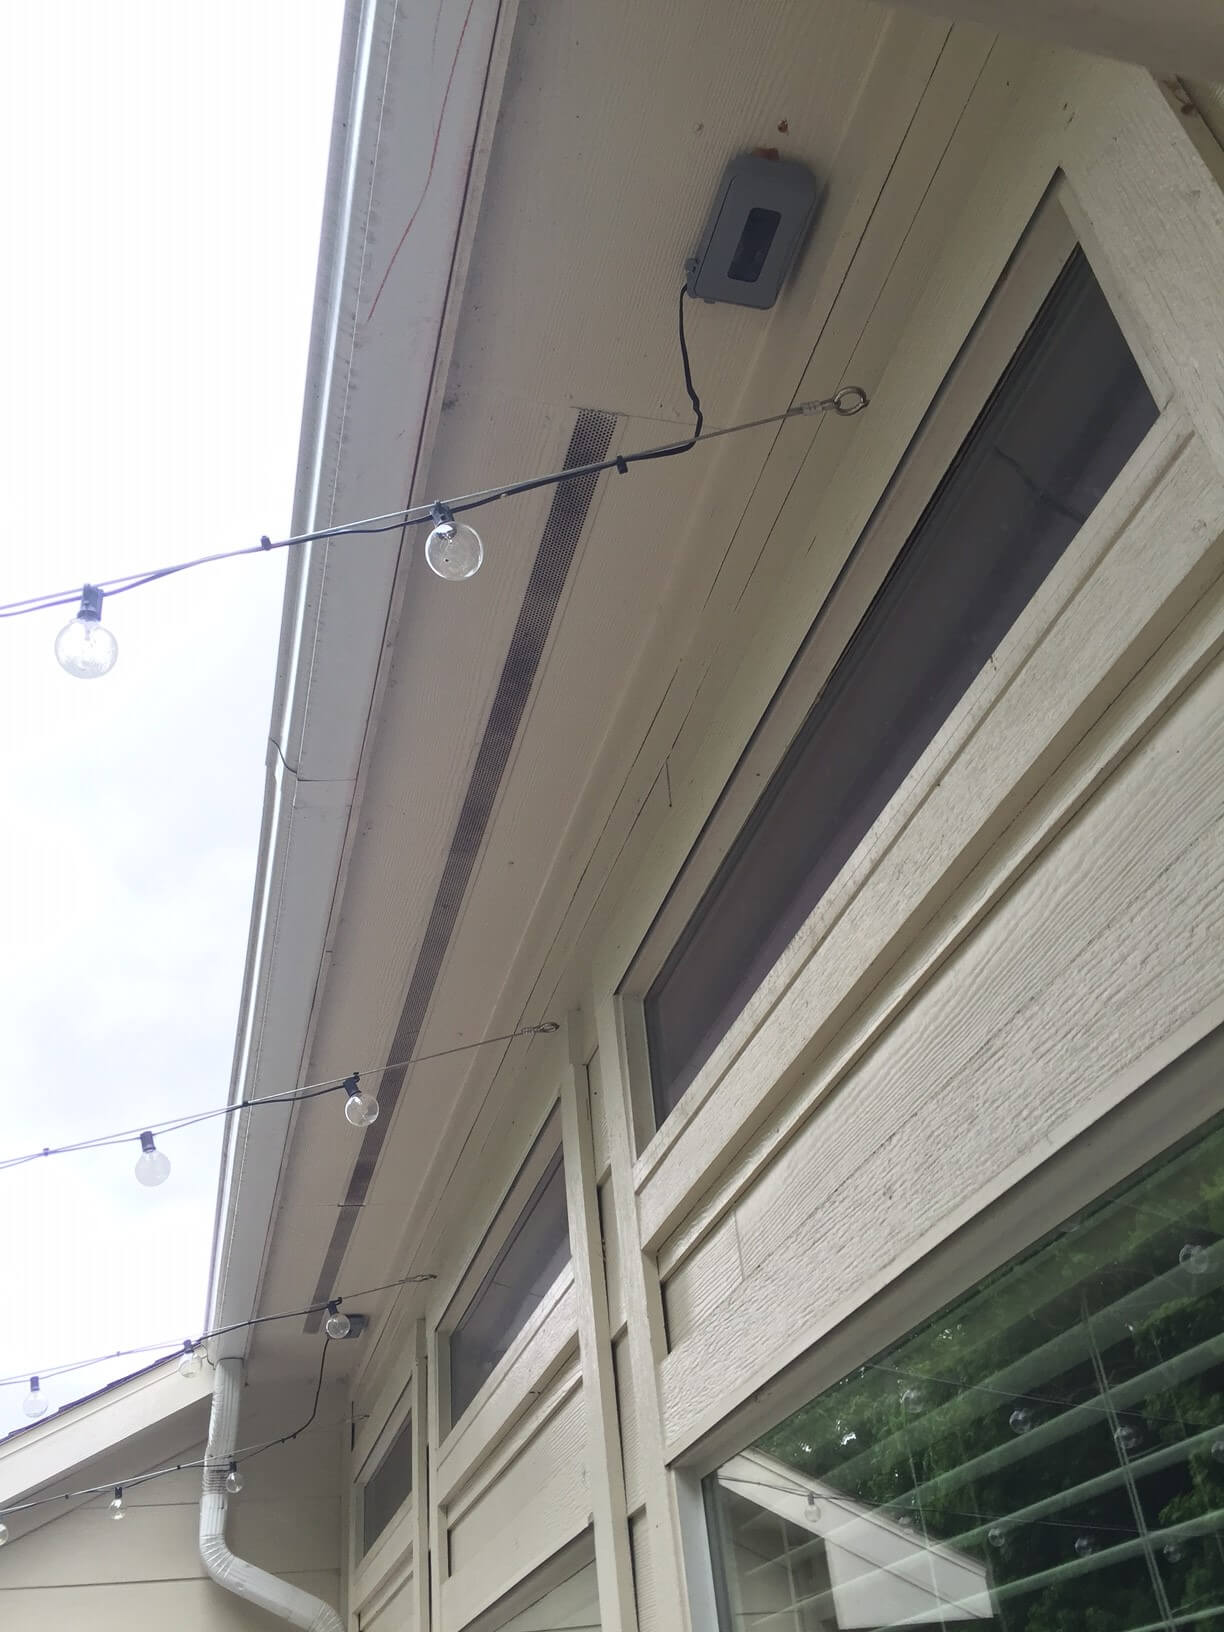 This is how string lights attach to the house.